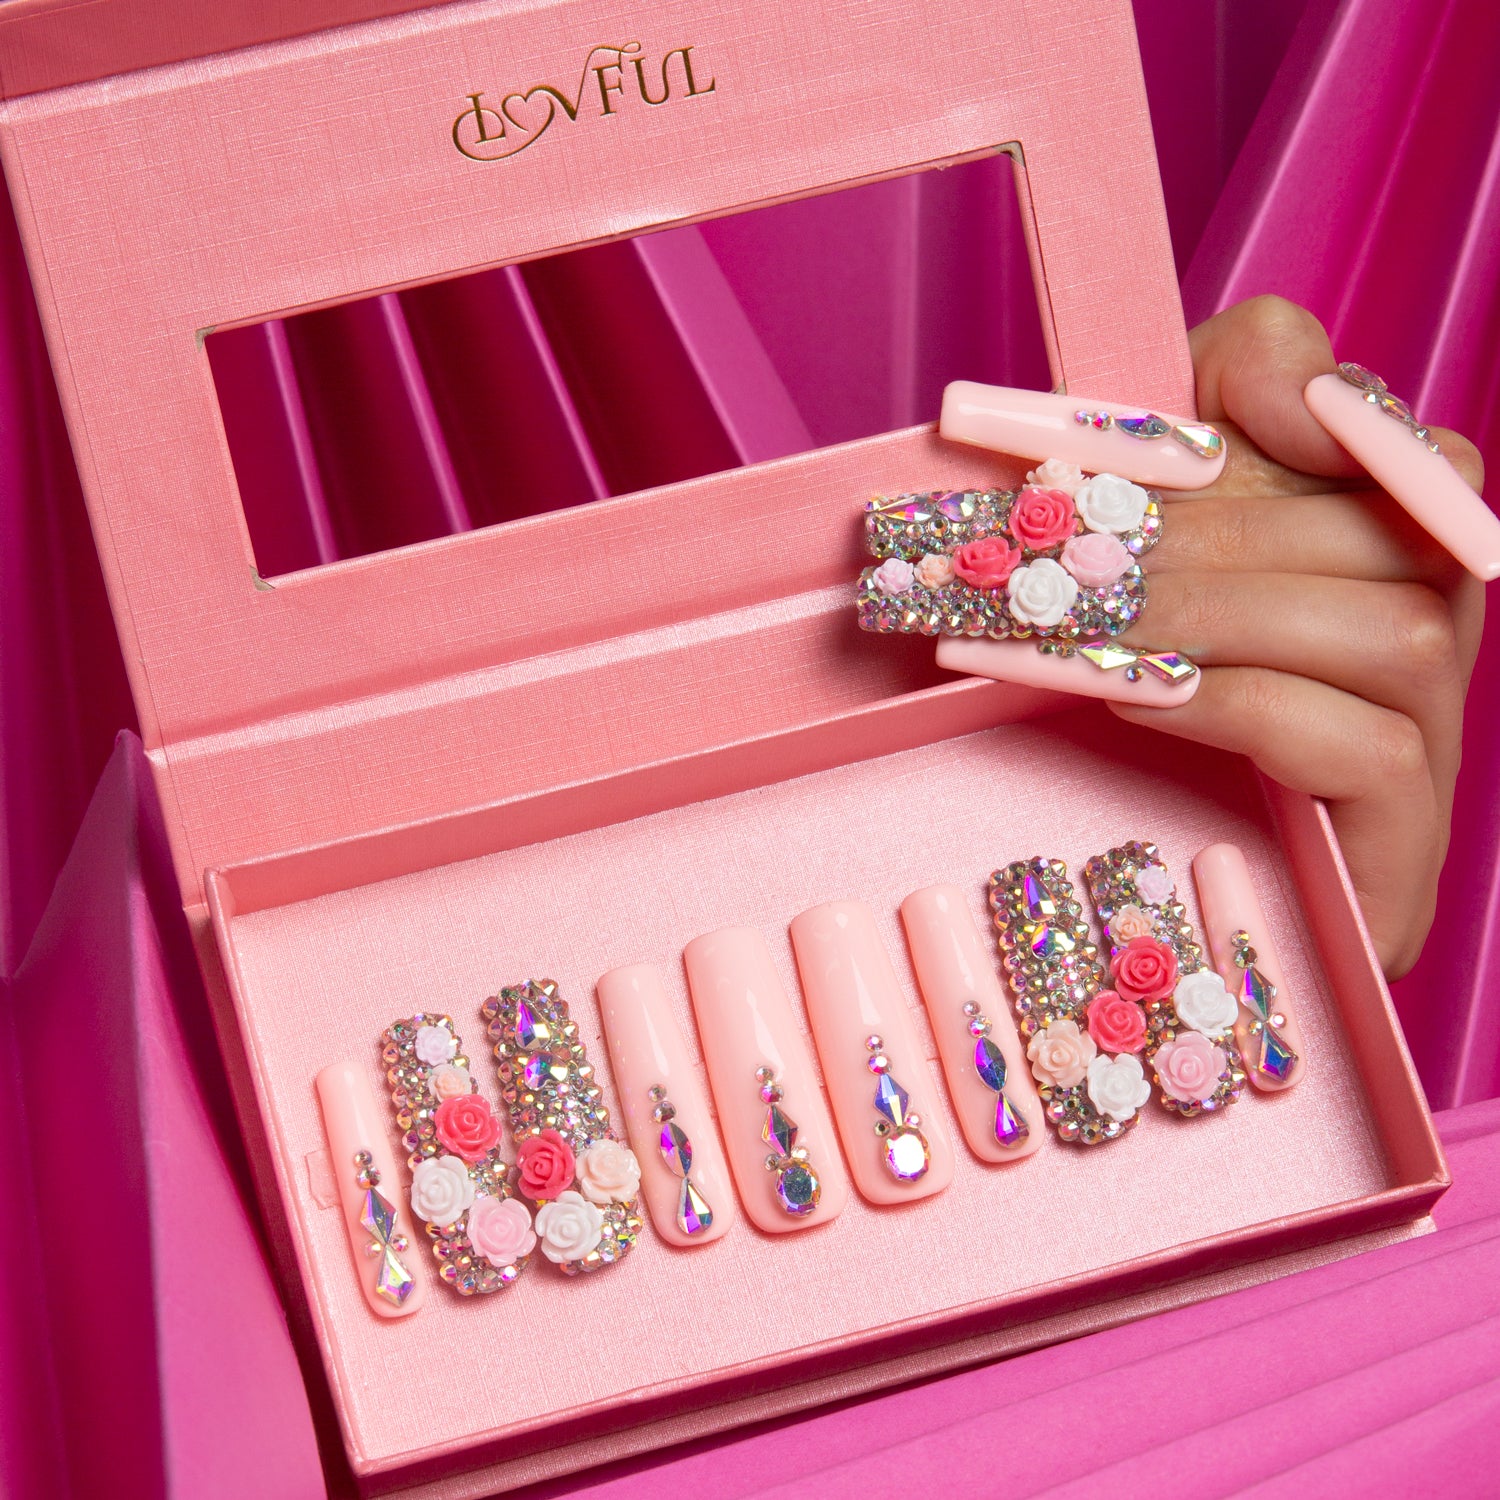 Rose Garden Bliss press-on nails by Lovful, featuring delicate roses and shimmering rhinestones, displayed in an open pink box.